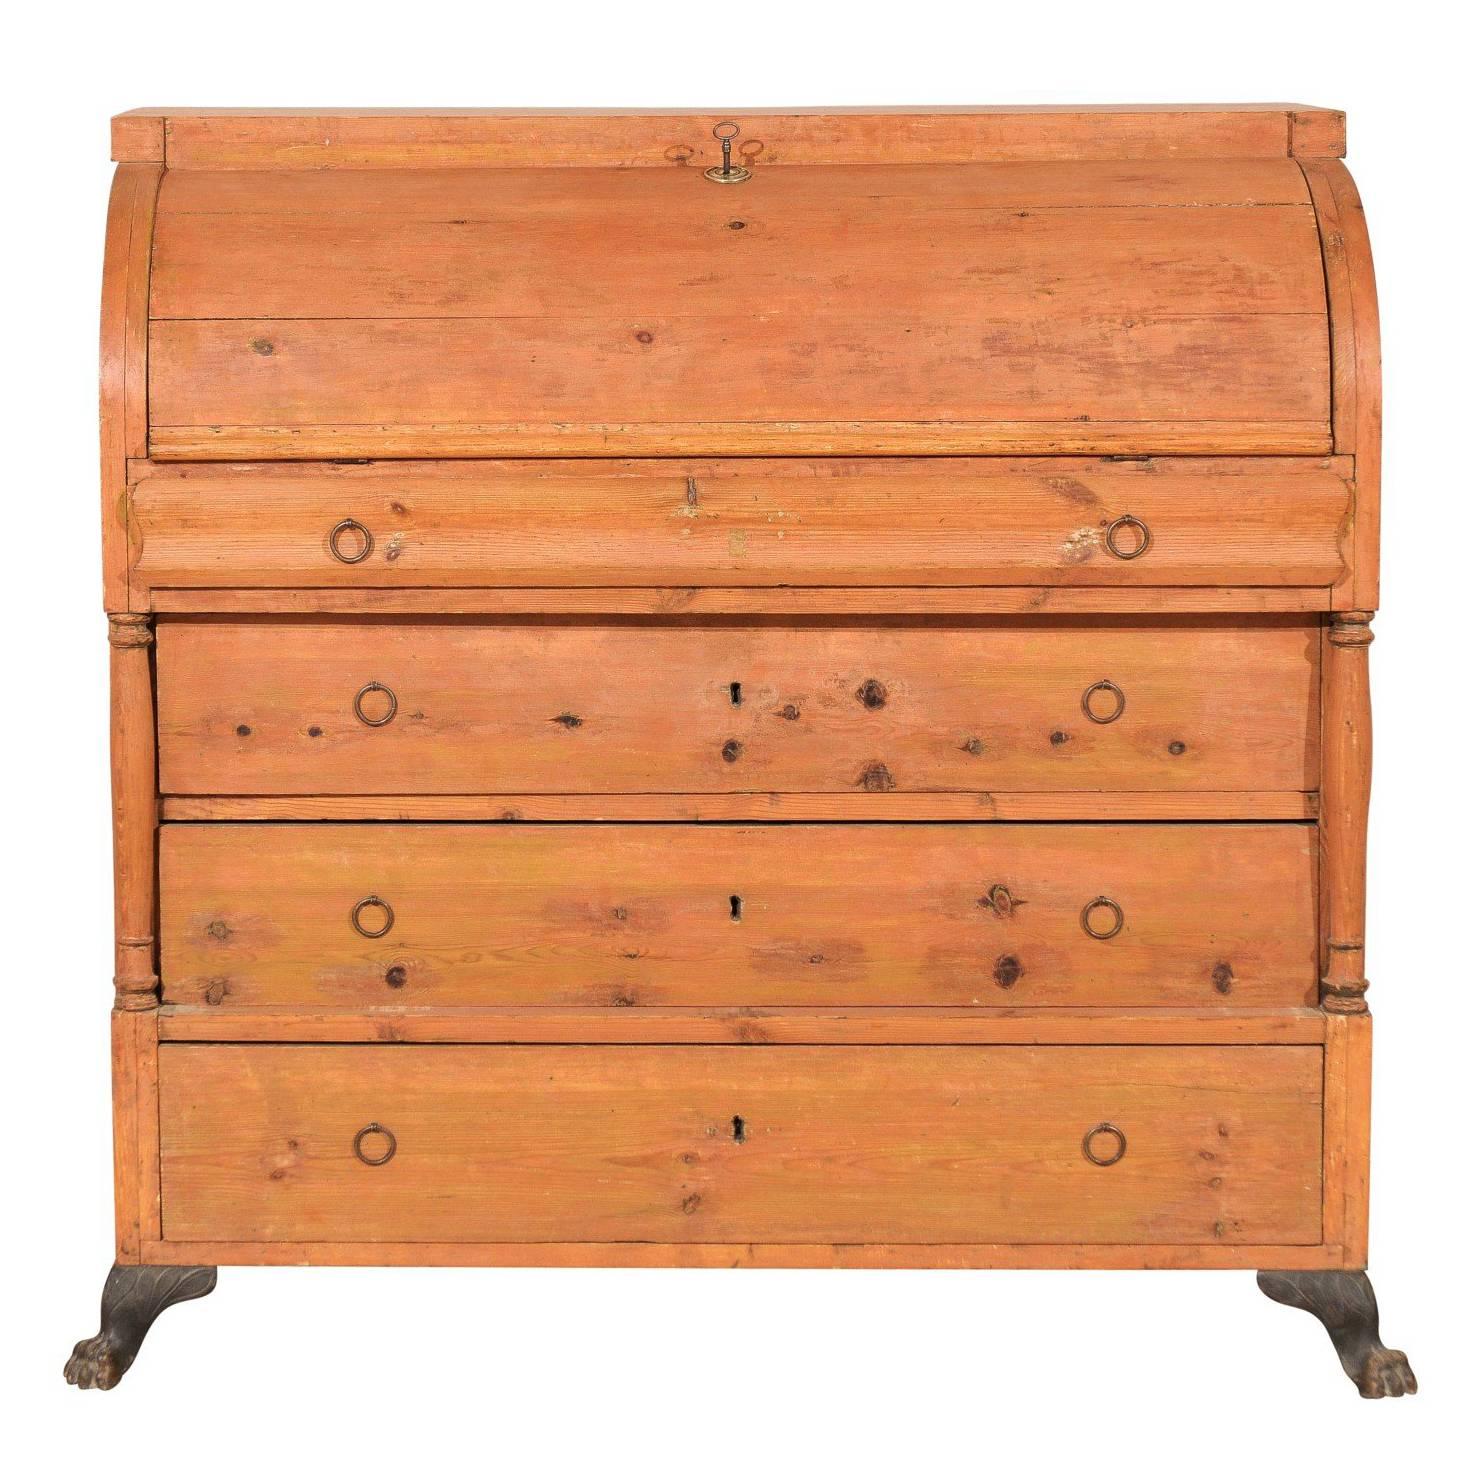 Swedish Mid-19th Century Chest with Convex Drop Front and Inner Drawers For Sale